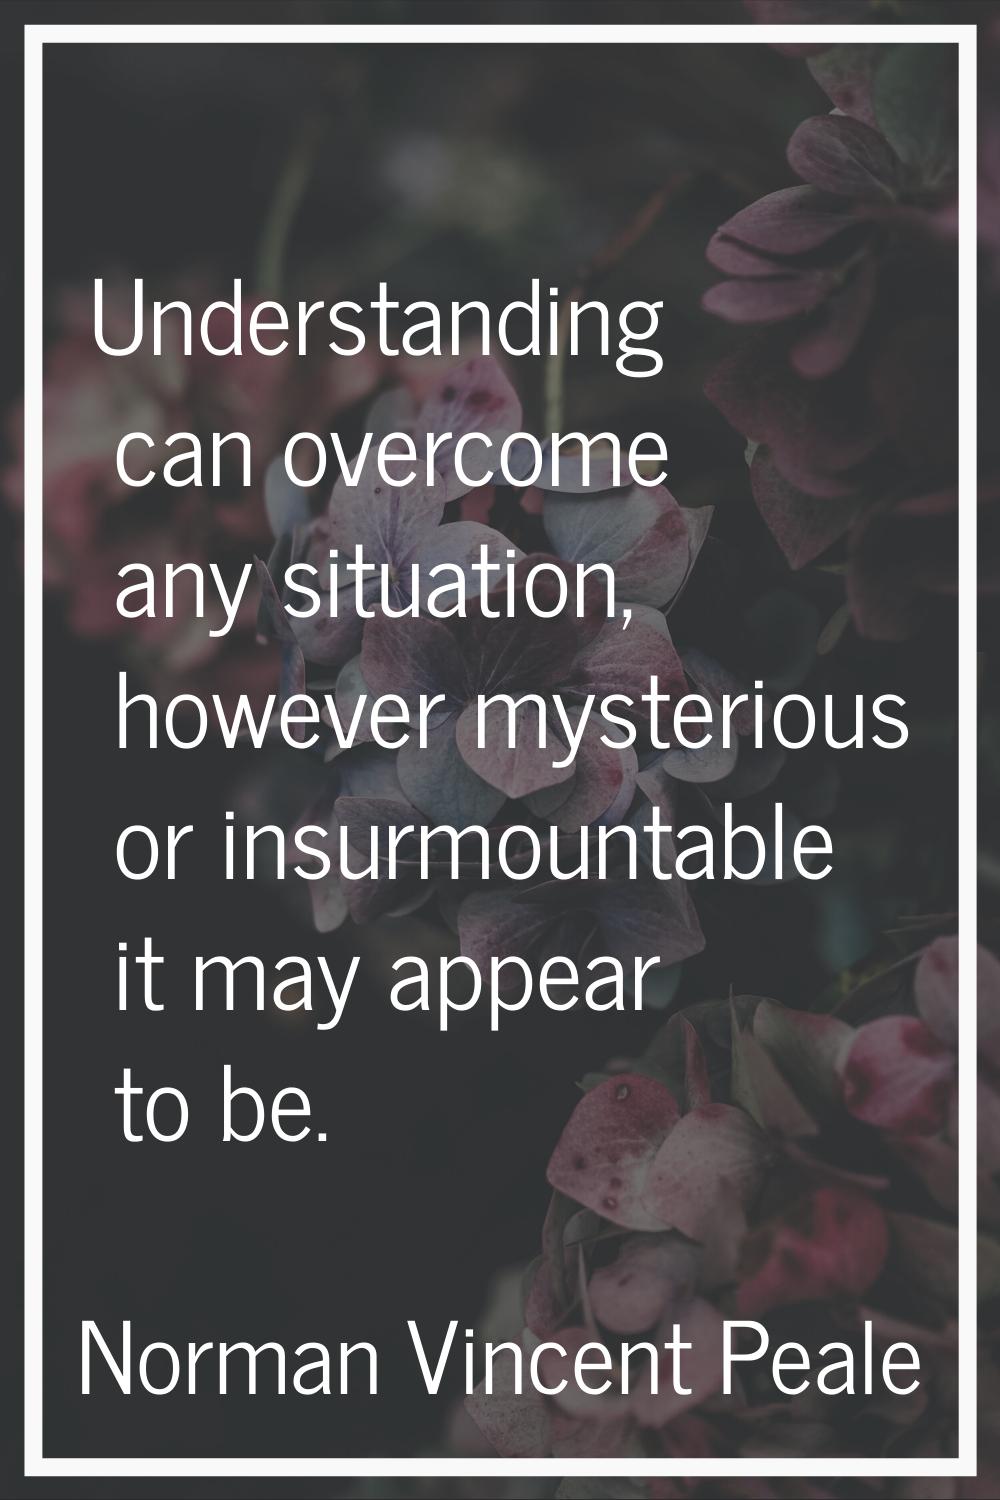 Understanding can overcome any situation, however mysterious or insurmountable it may appear to be.